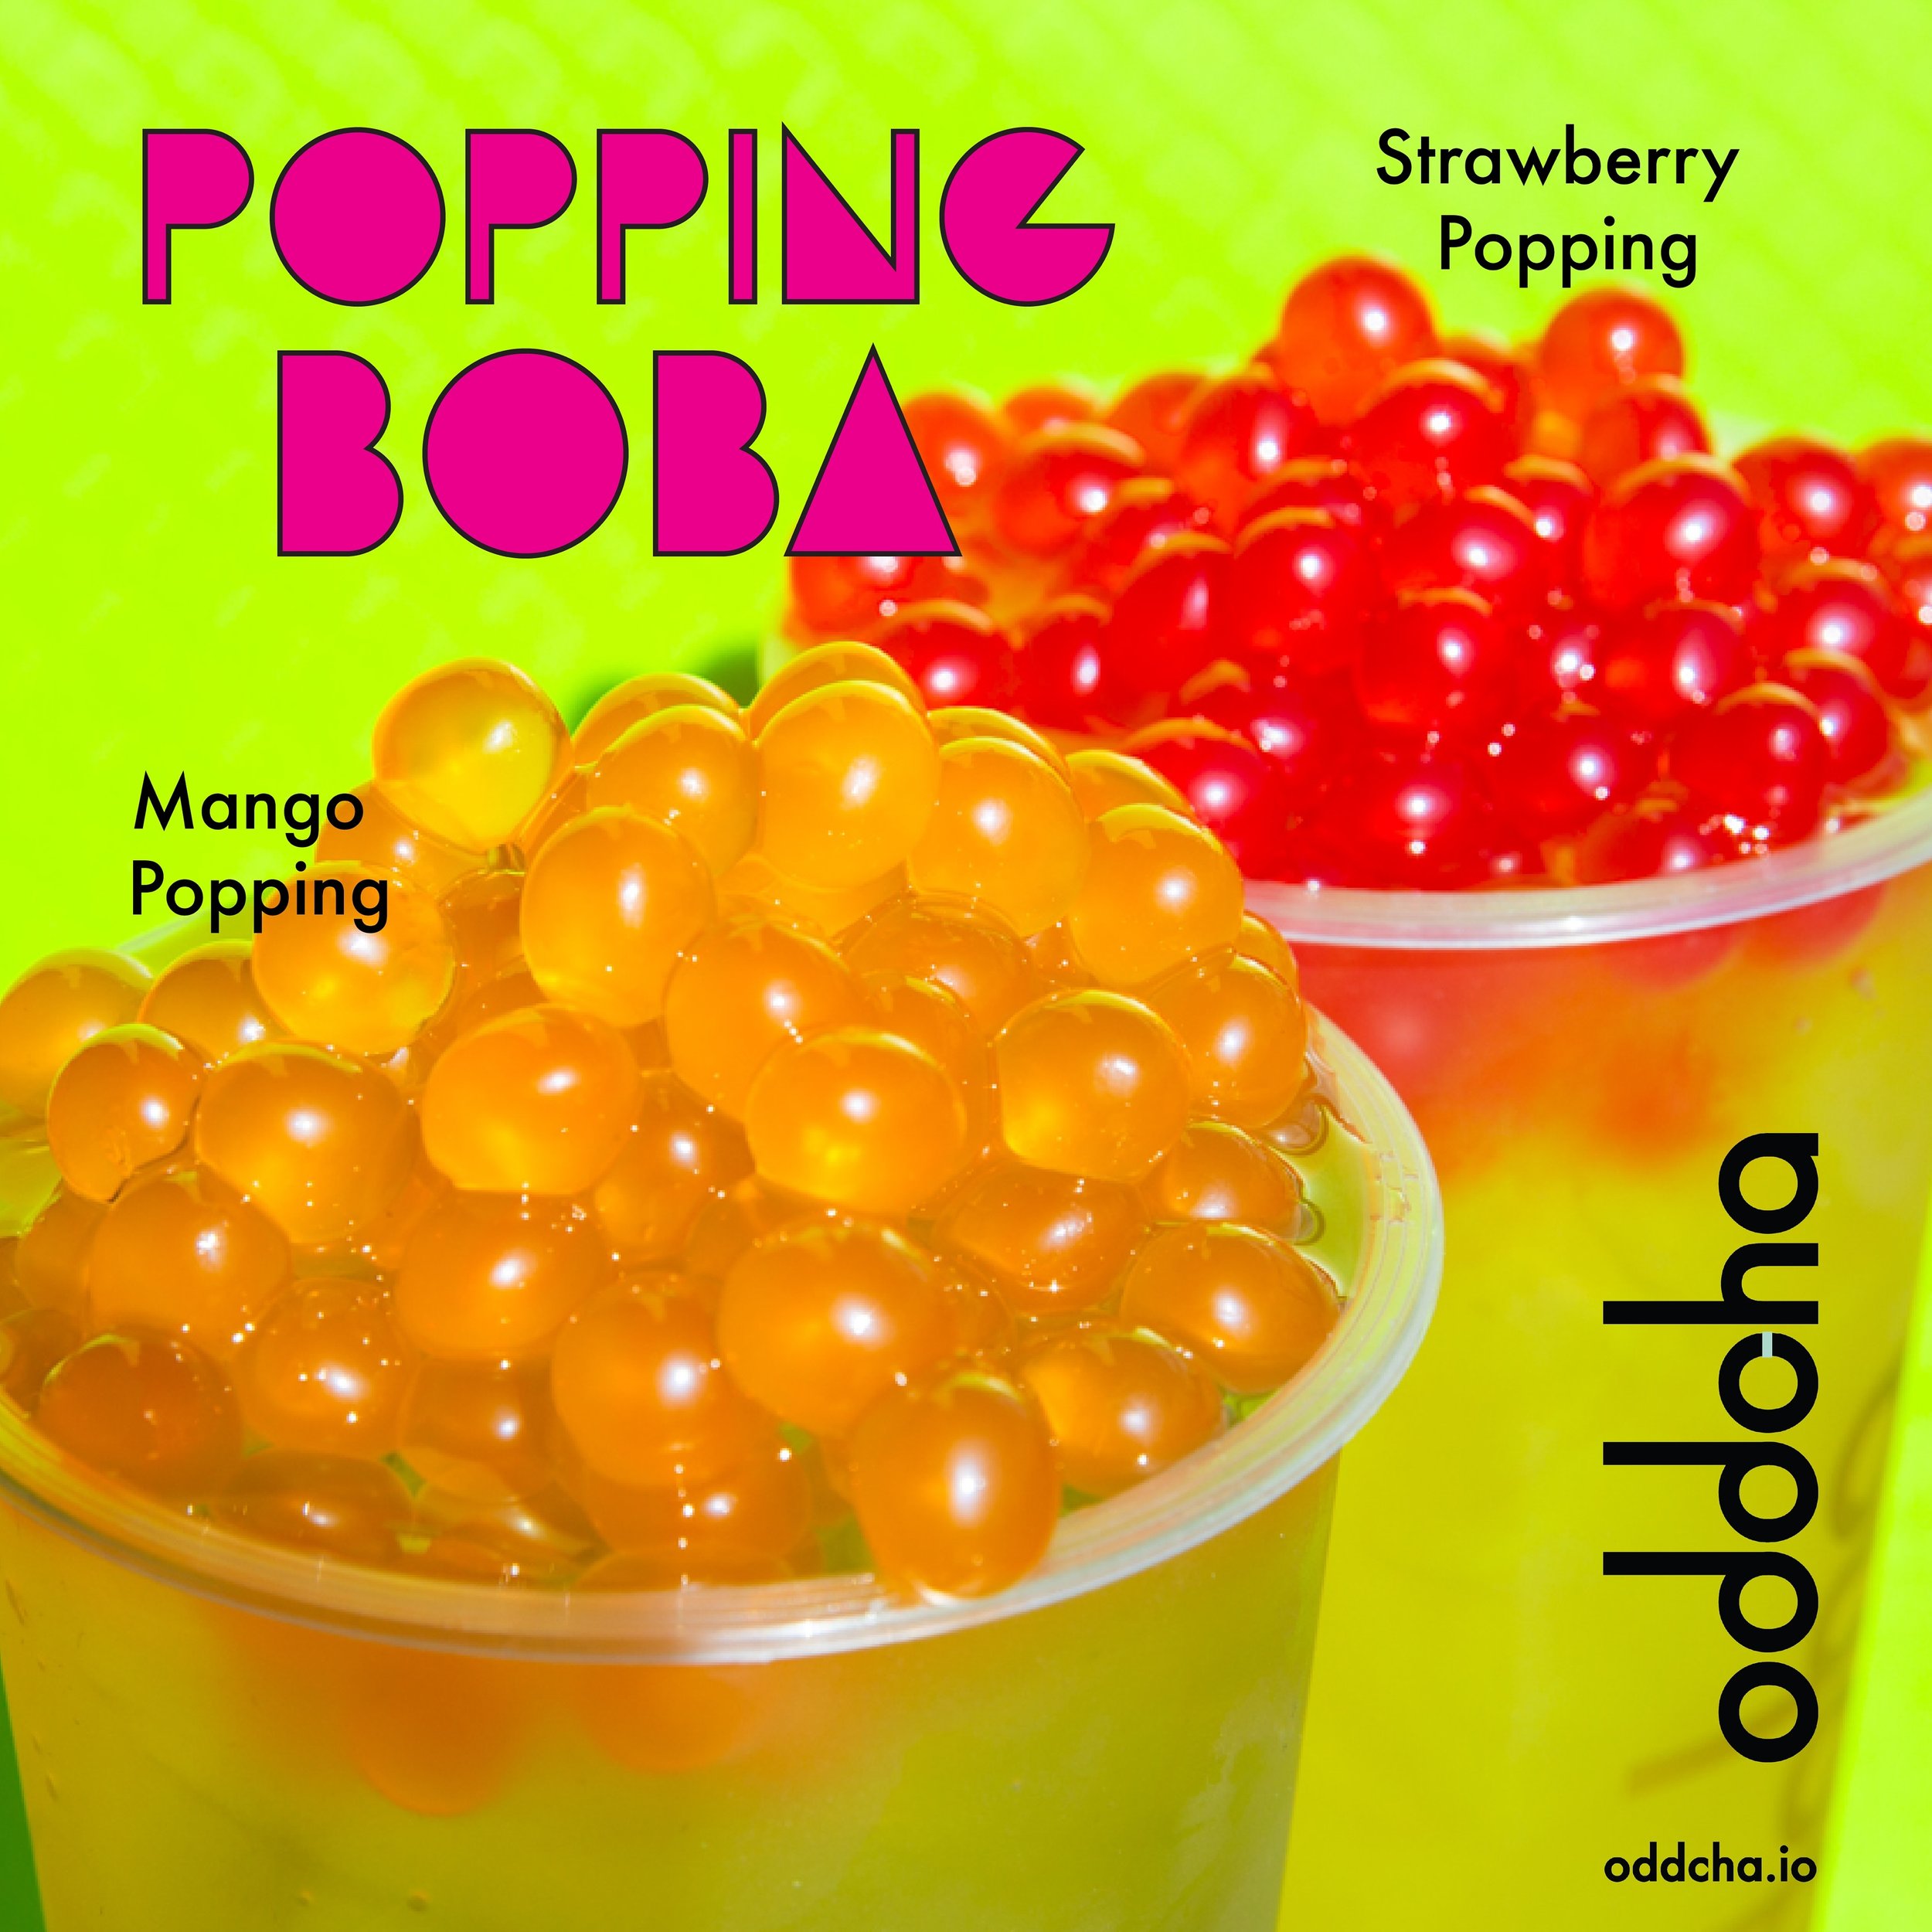 Summer vibes in every sips!!! Popping boba mango and strawberry are here to elevate your go-to oddcha drinks into a refreshing sensation.Handcraft Fresh Tea Real Fruit. #SummerRefreshment #oddchadelights #oddchaShareaSip #oddcha #oddchaclub #downtown